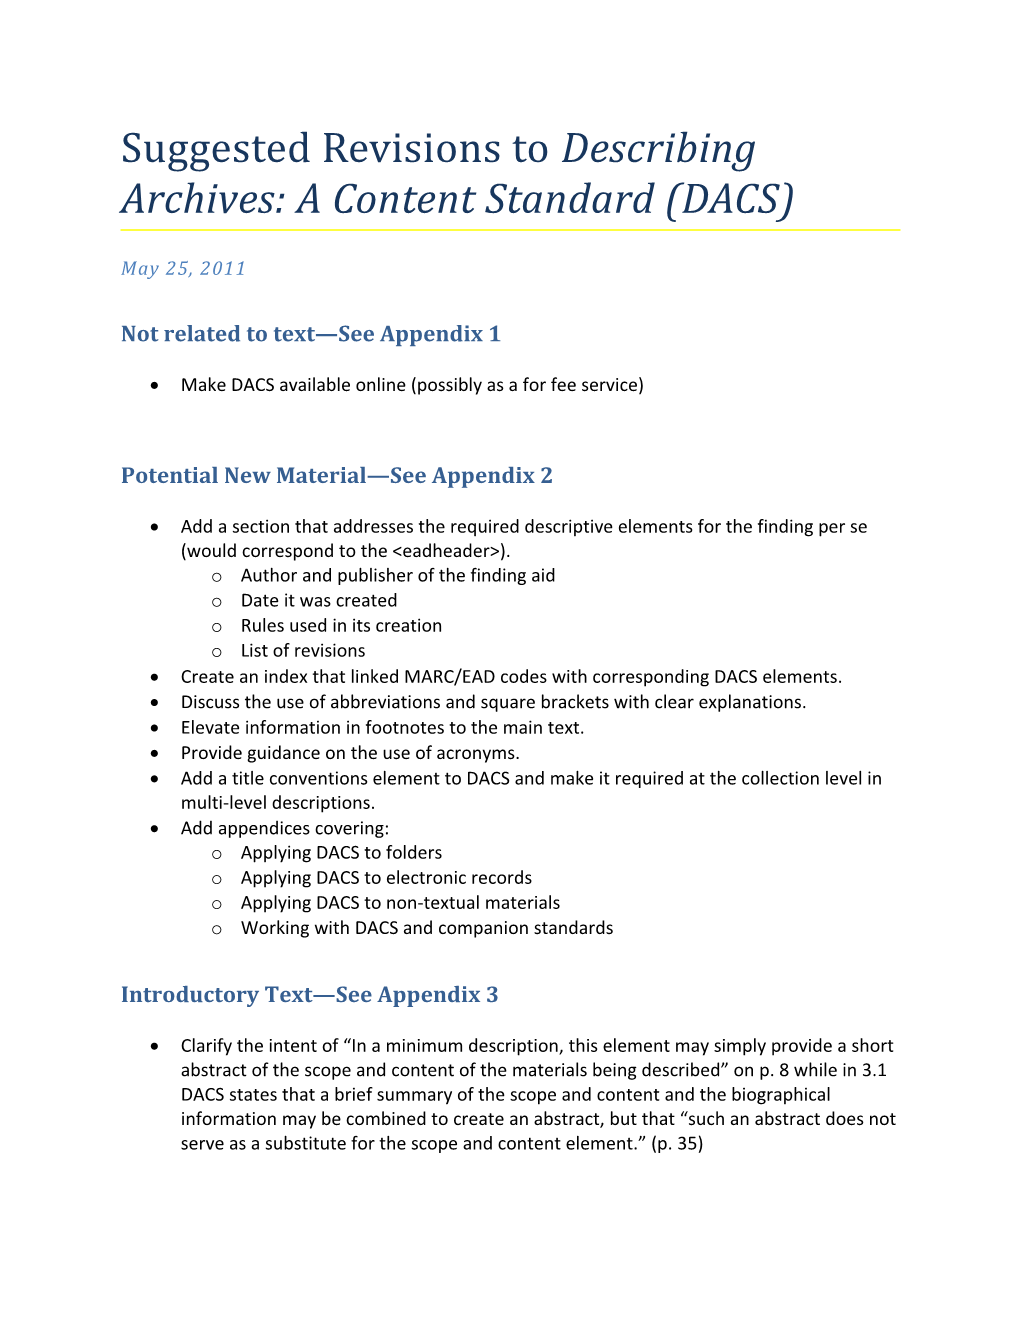 Suggested Revisions to Describing Archives: a Content Standard (DACS)